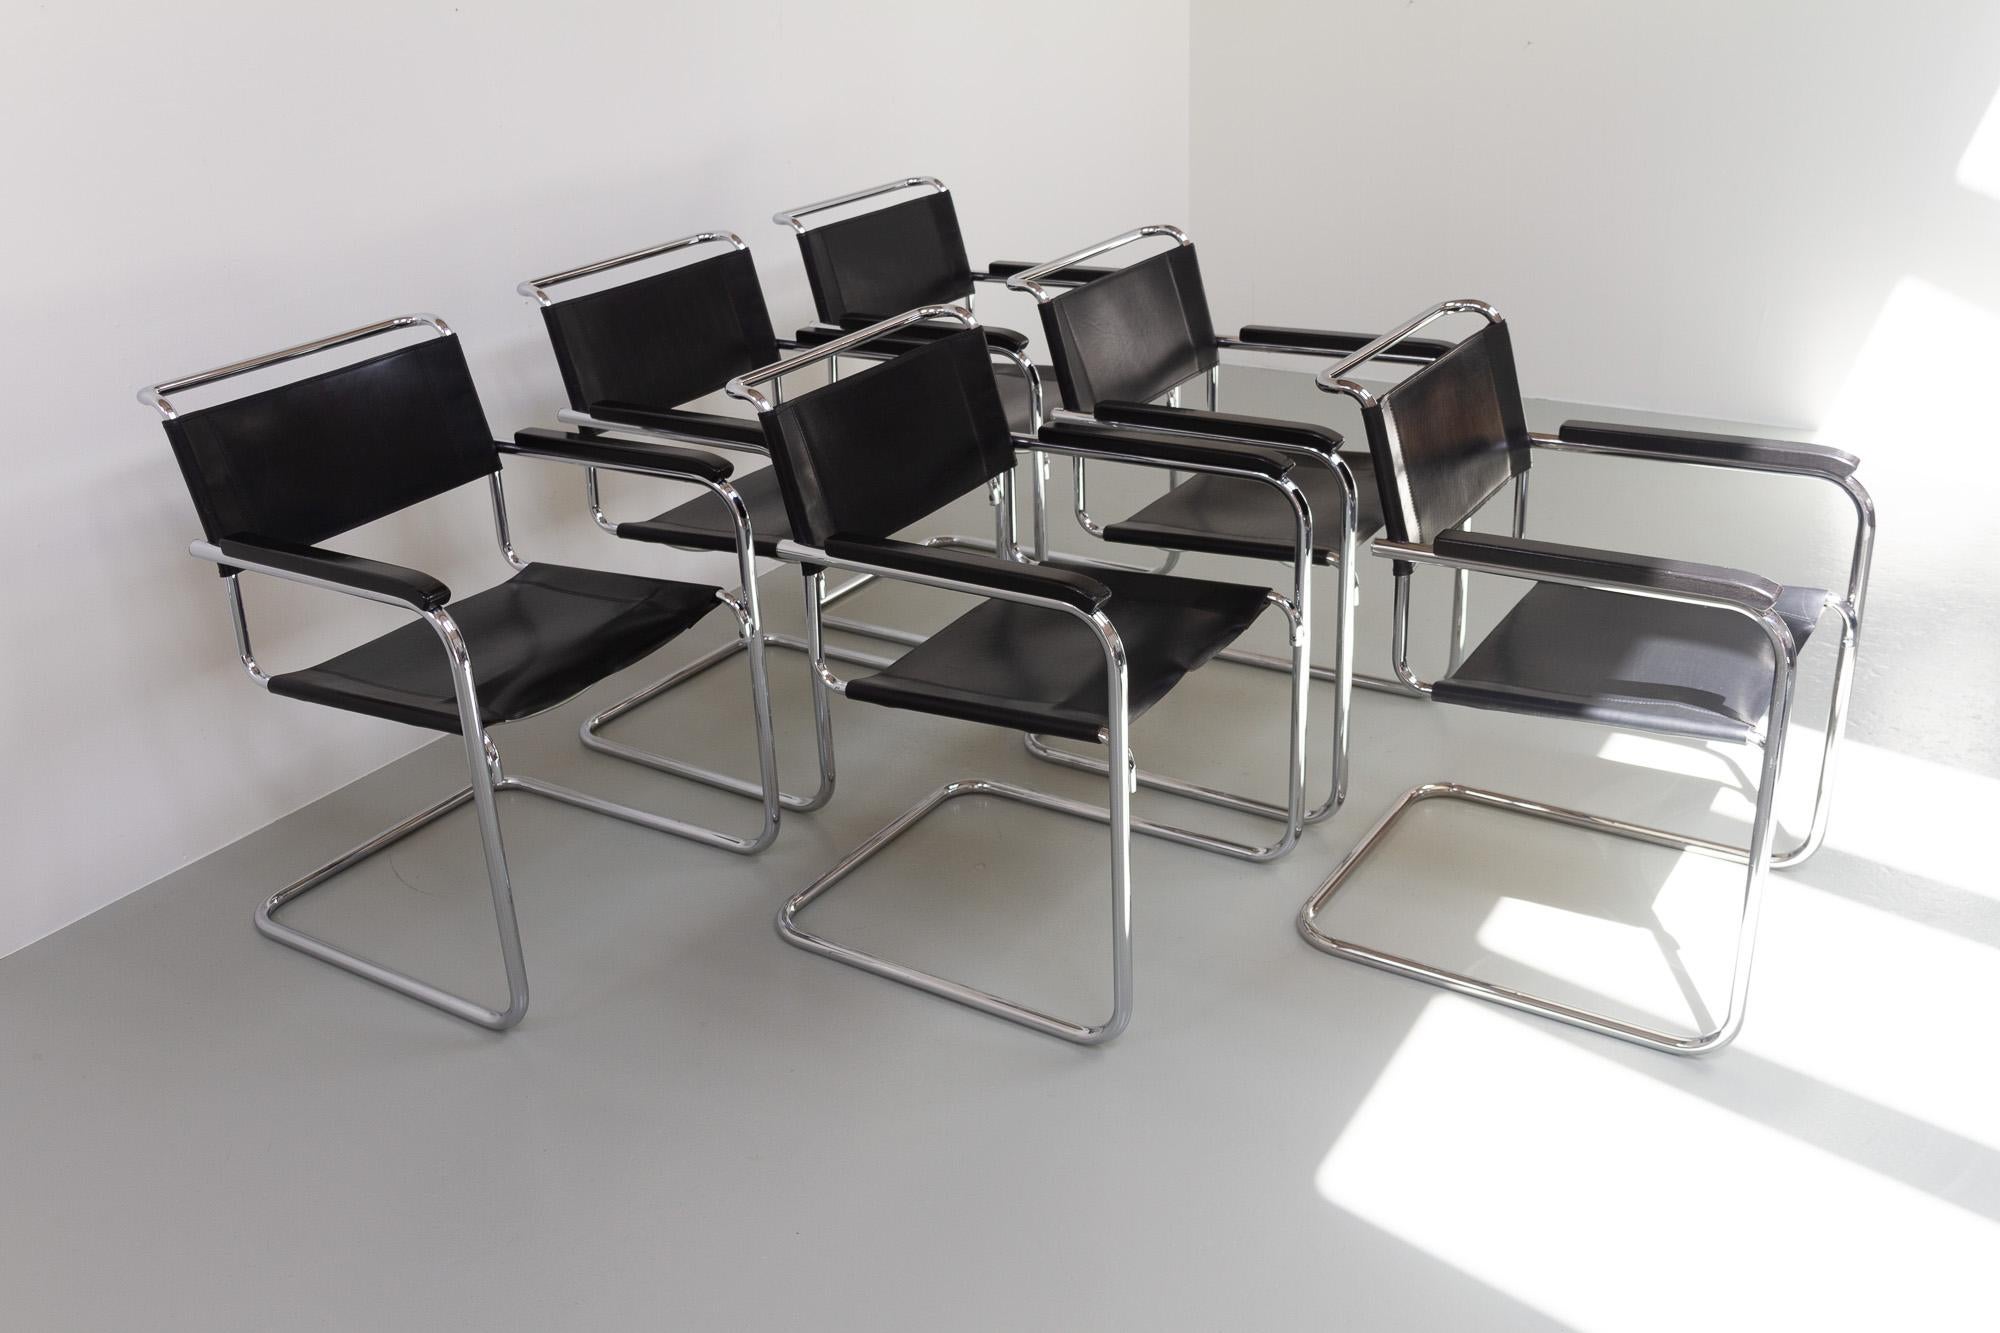 Vintage Cantilever Chairs S 34 by Mart Stam for Thonet, 1980s. Set of 6.
The classic Bauhaus design model 34 armchair designed in 1927 by Mart Stam for Thonet, Germany.
Frame in tubular chromed steel with seat and backrest in thick black saddle